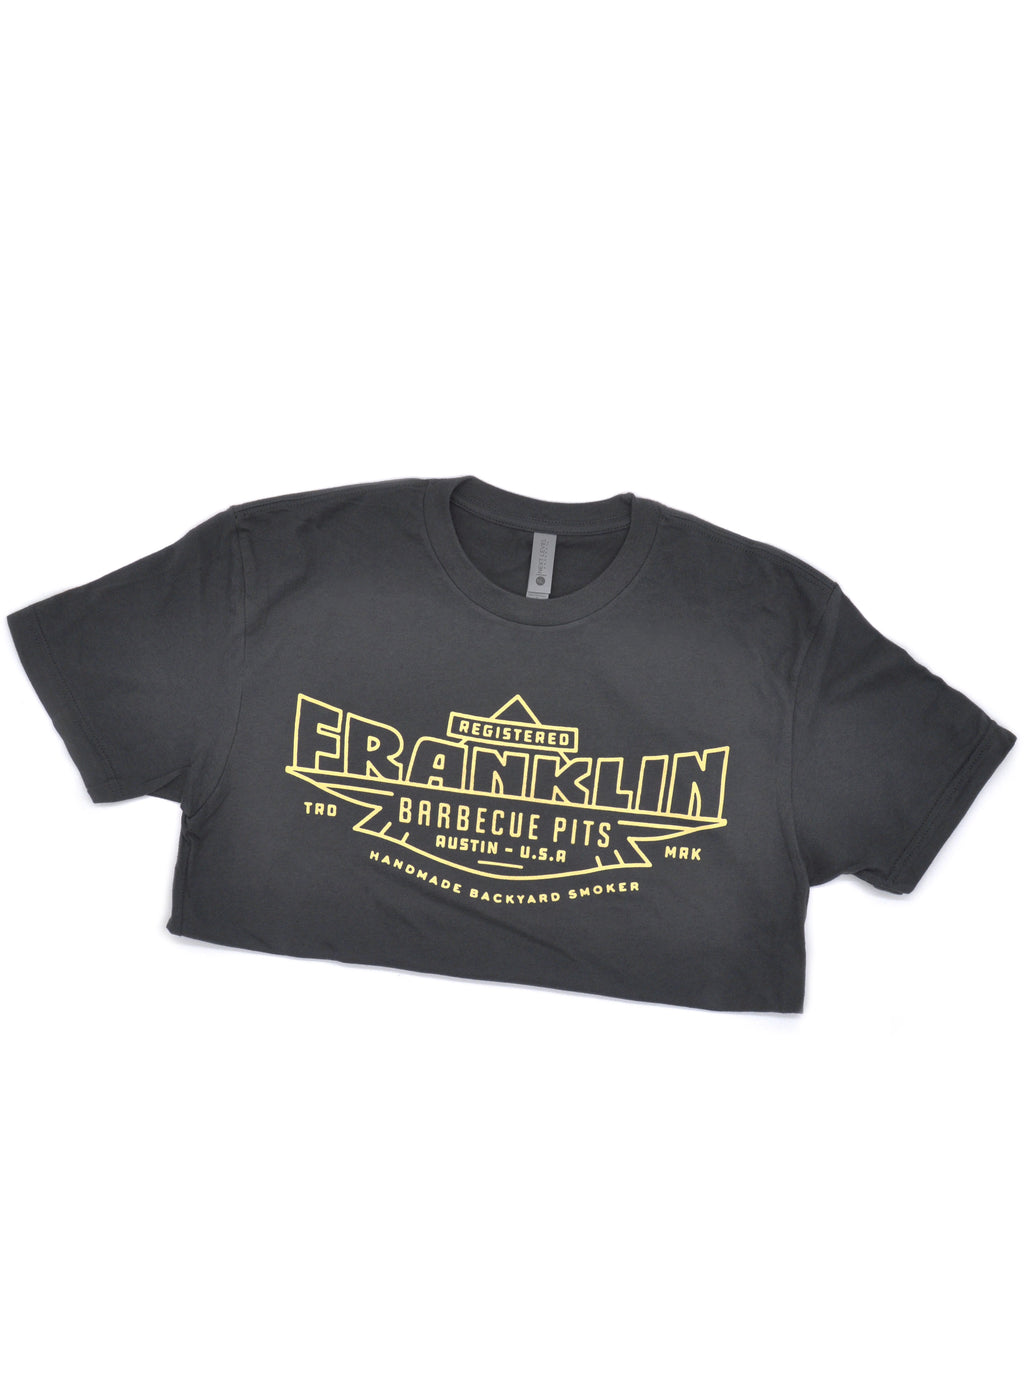 Grey t-shirt with Registered Franklin Barbecue Pits logo in yellow